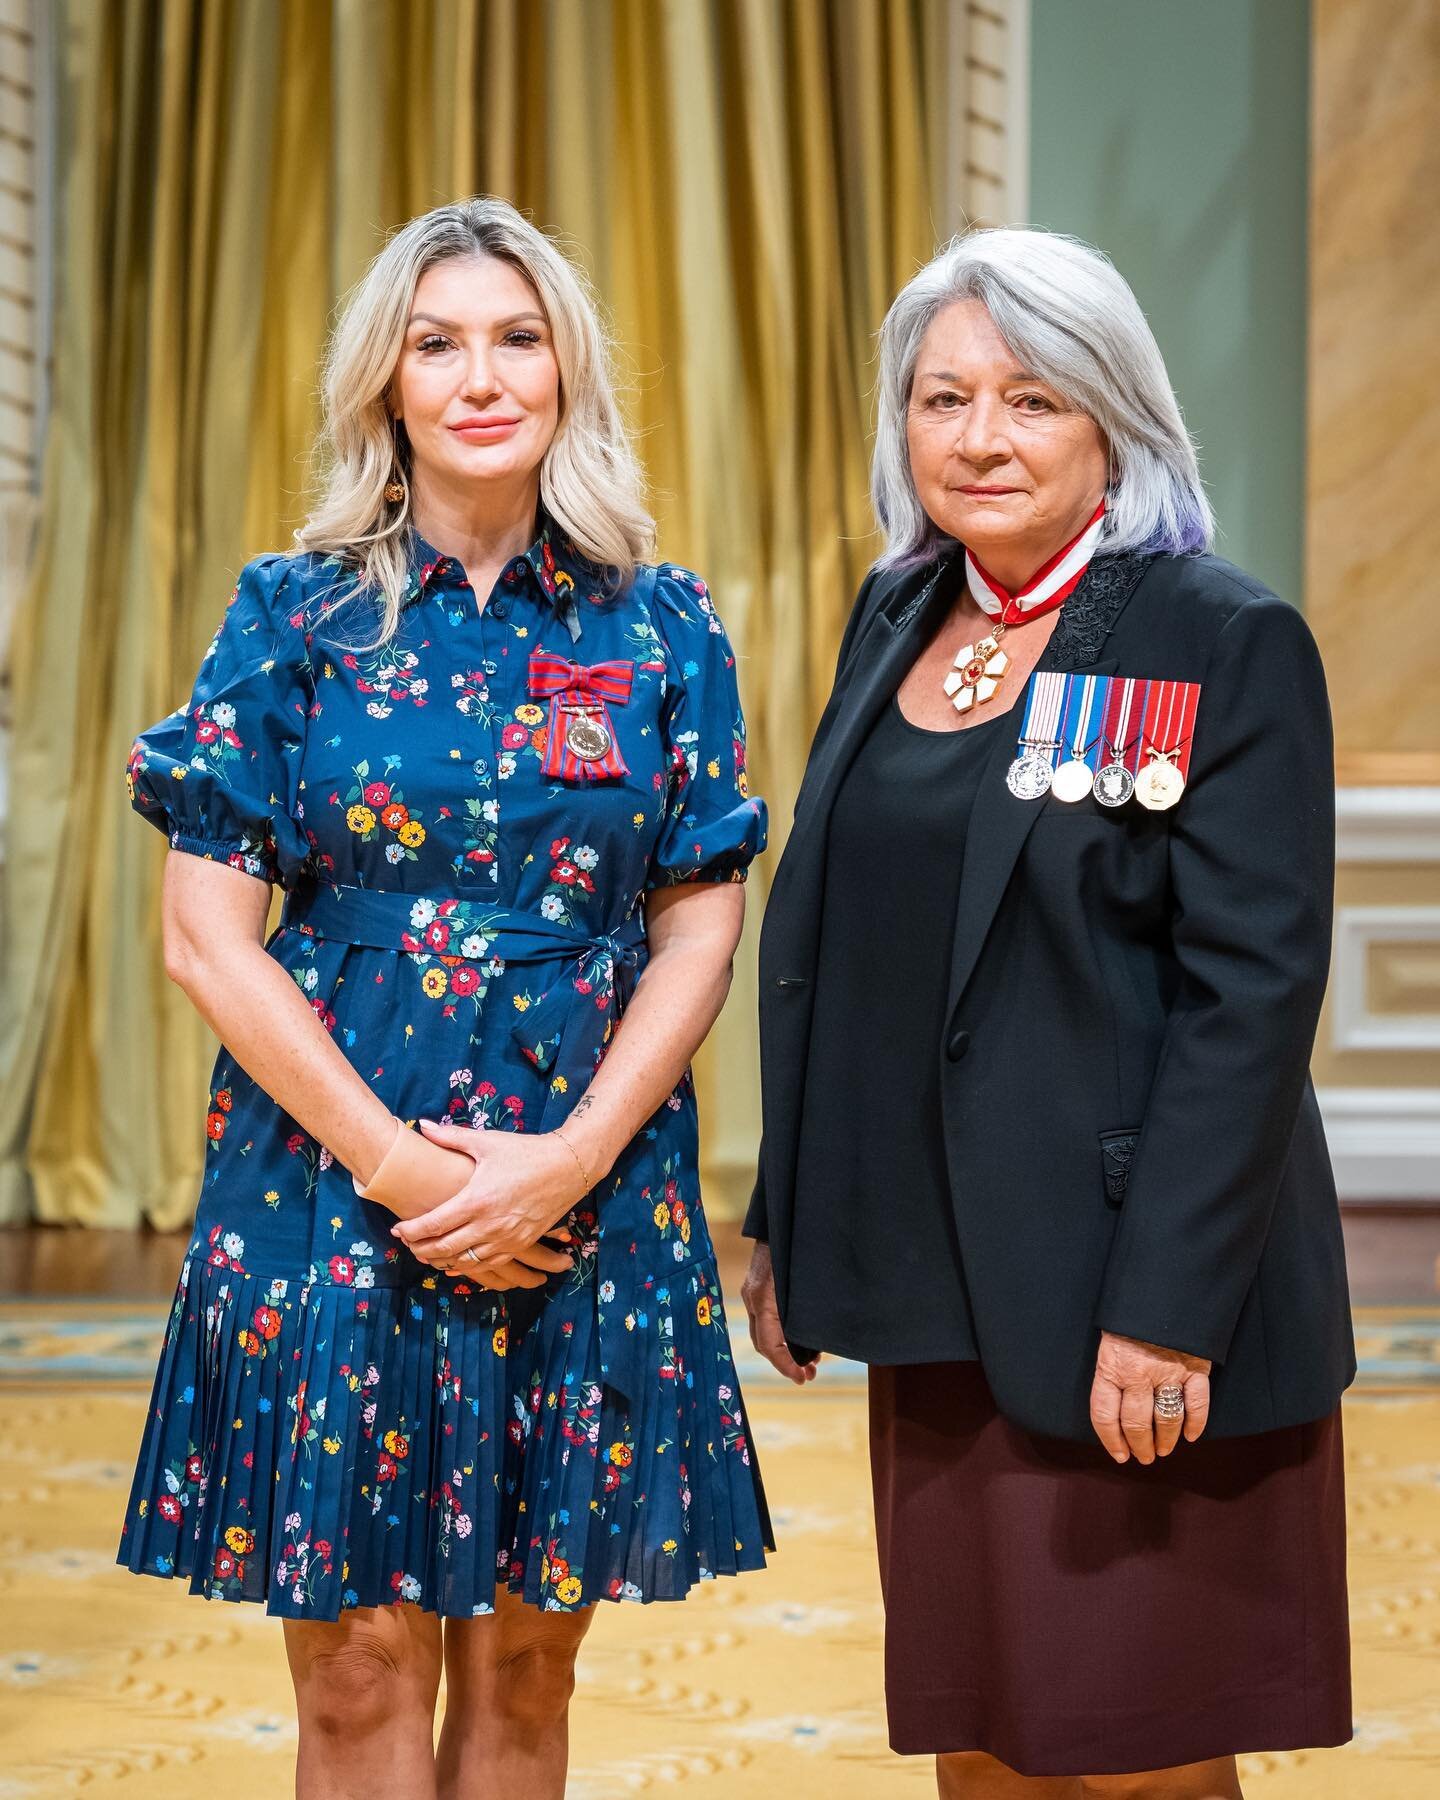 This is our patient Julie Callaghan who received her completed prosthetic this week! Julie recently received a Medal of Bravery from The Governor General in recognition of an act of bravery in hazardous circumstances. In May 2018 Julie attempted to r